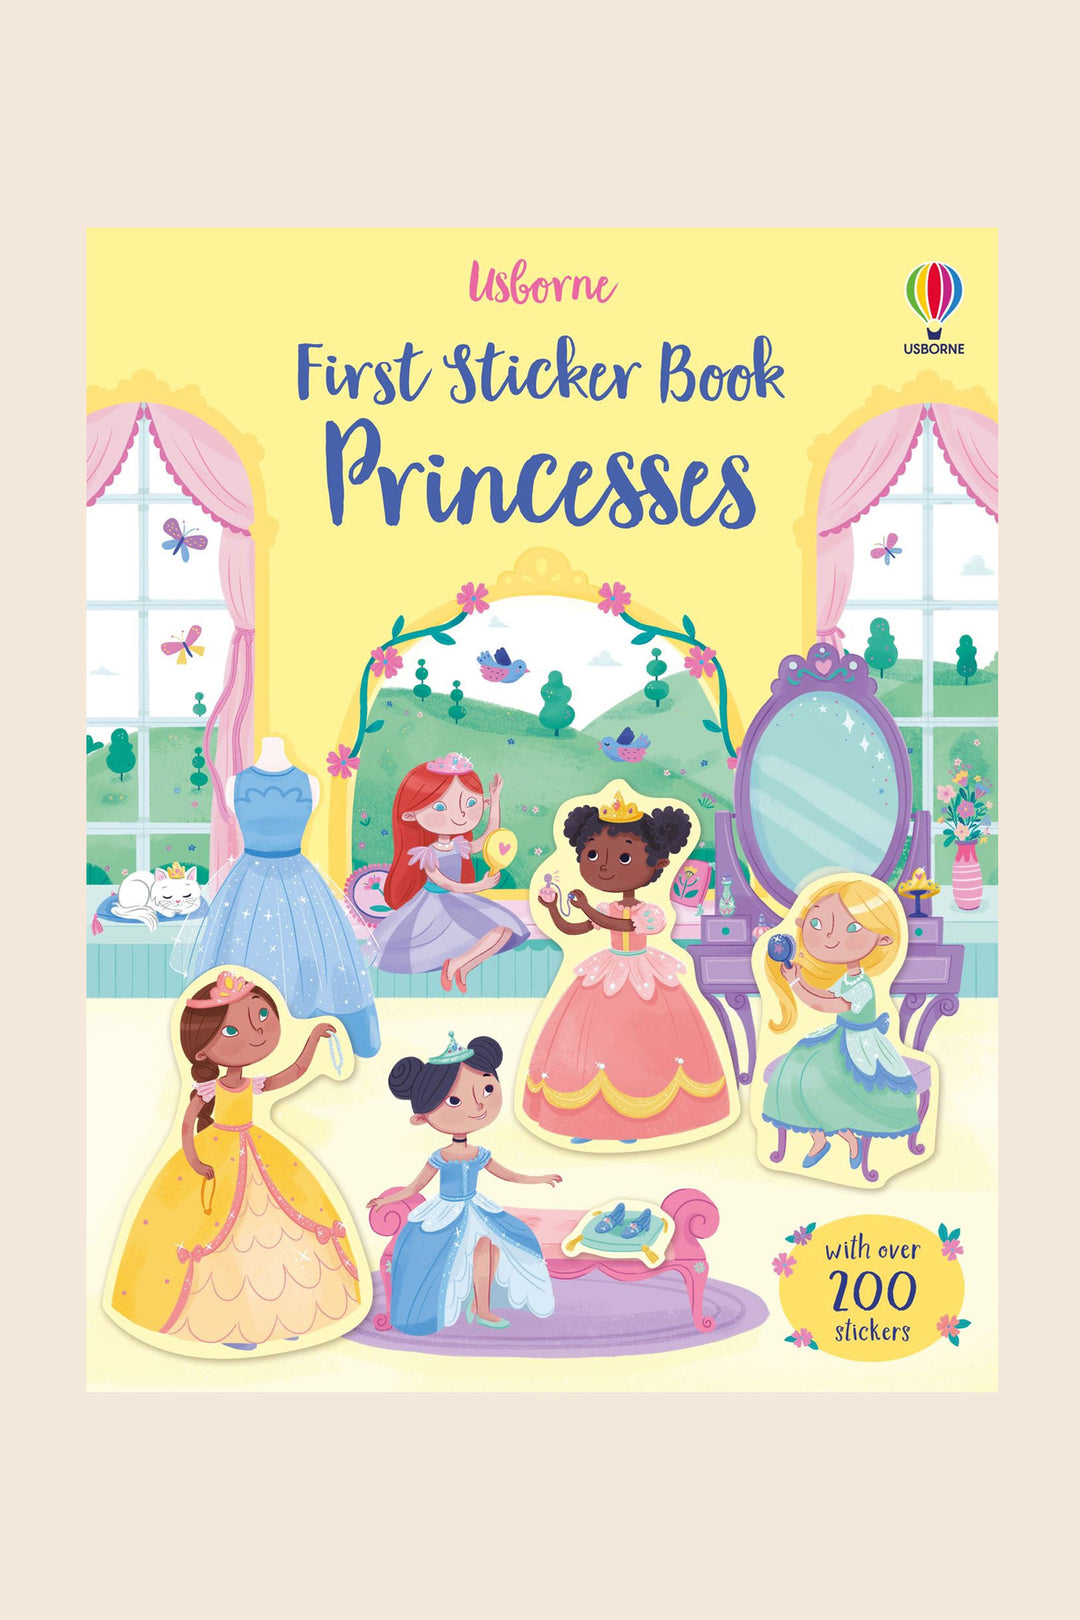 First Sticker Book Princesses with over 200 stickers